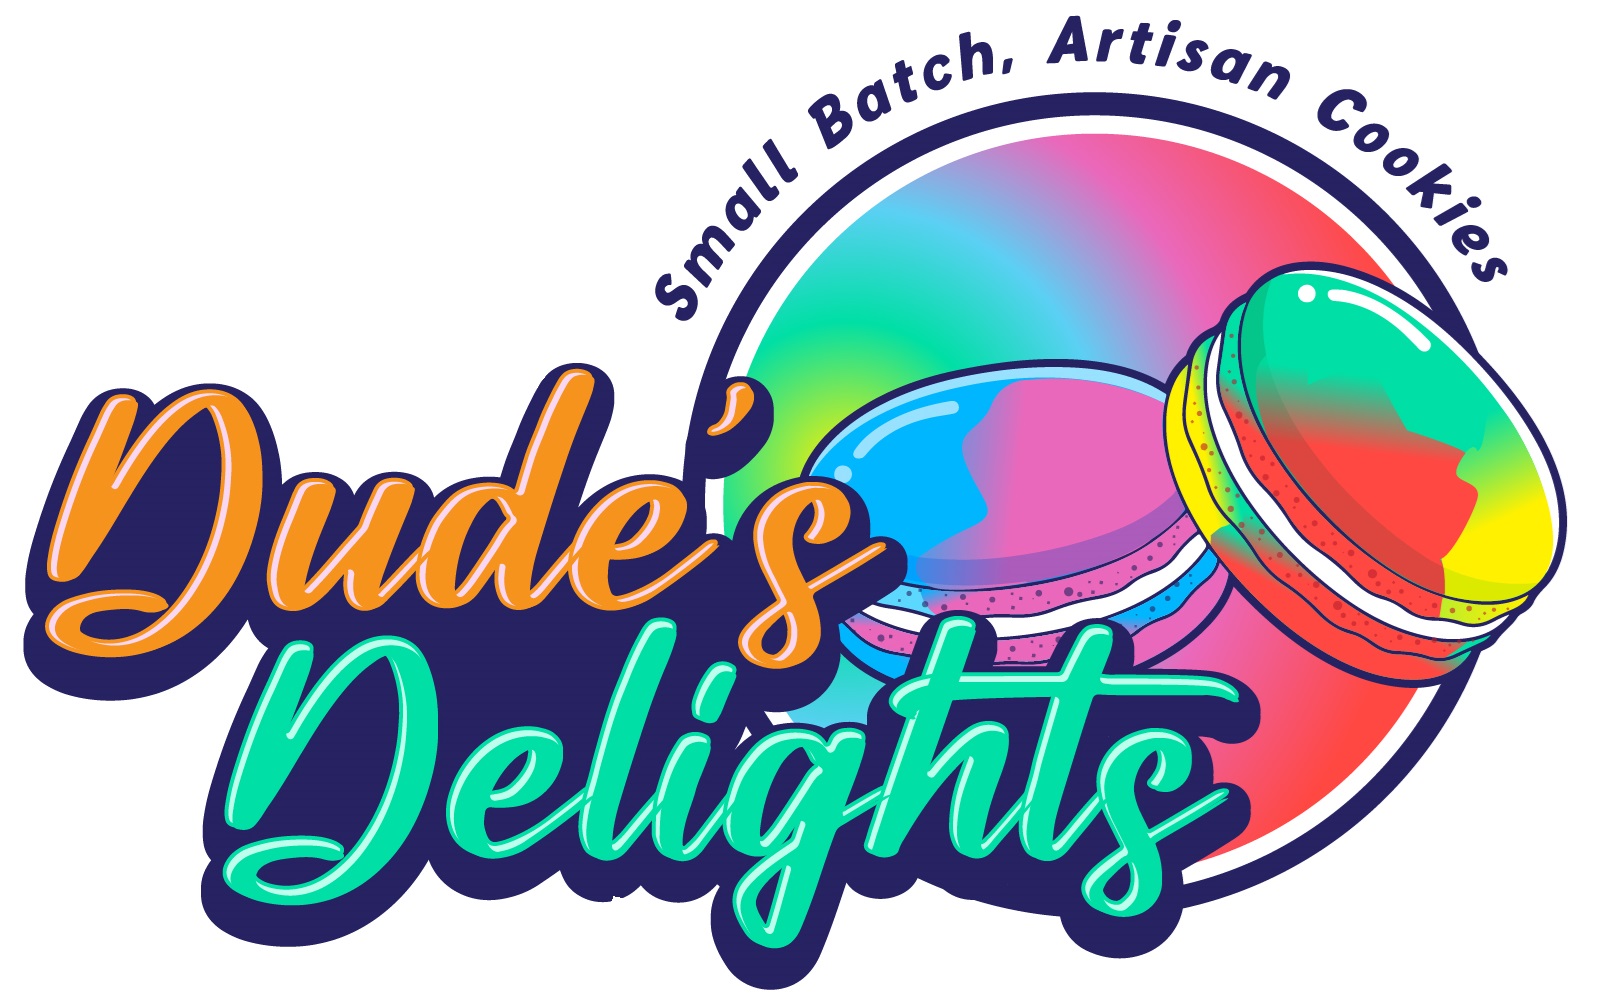 Dude's Delights - small batch, artisan cookies.